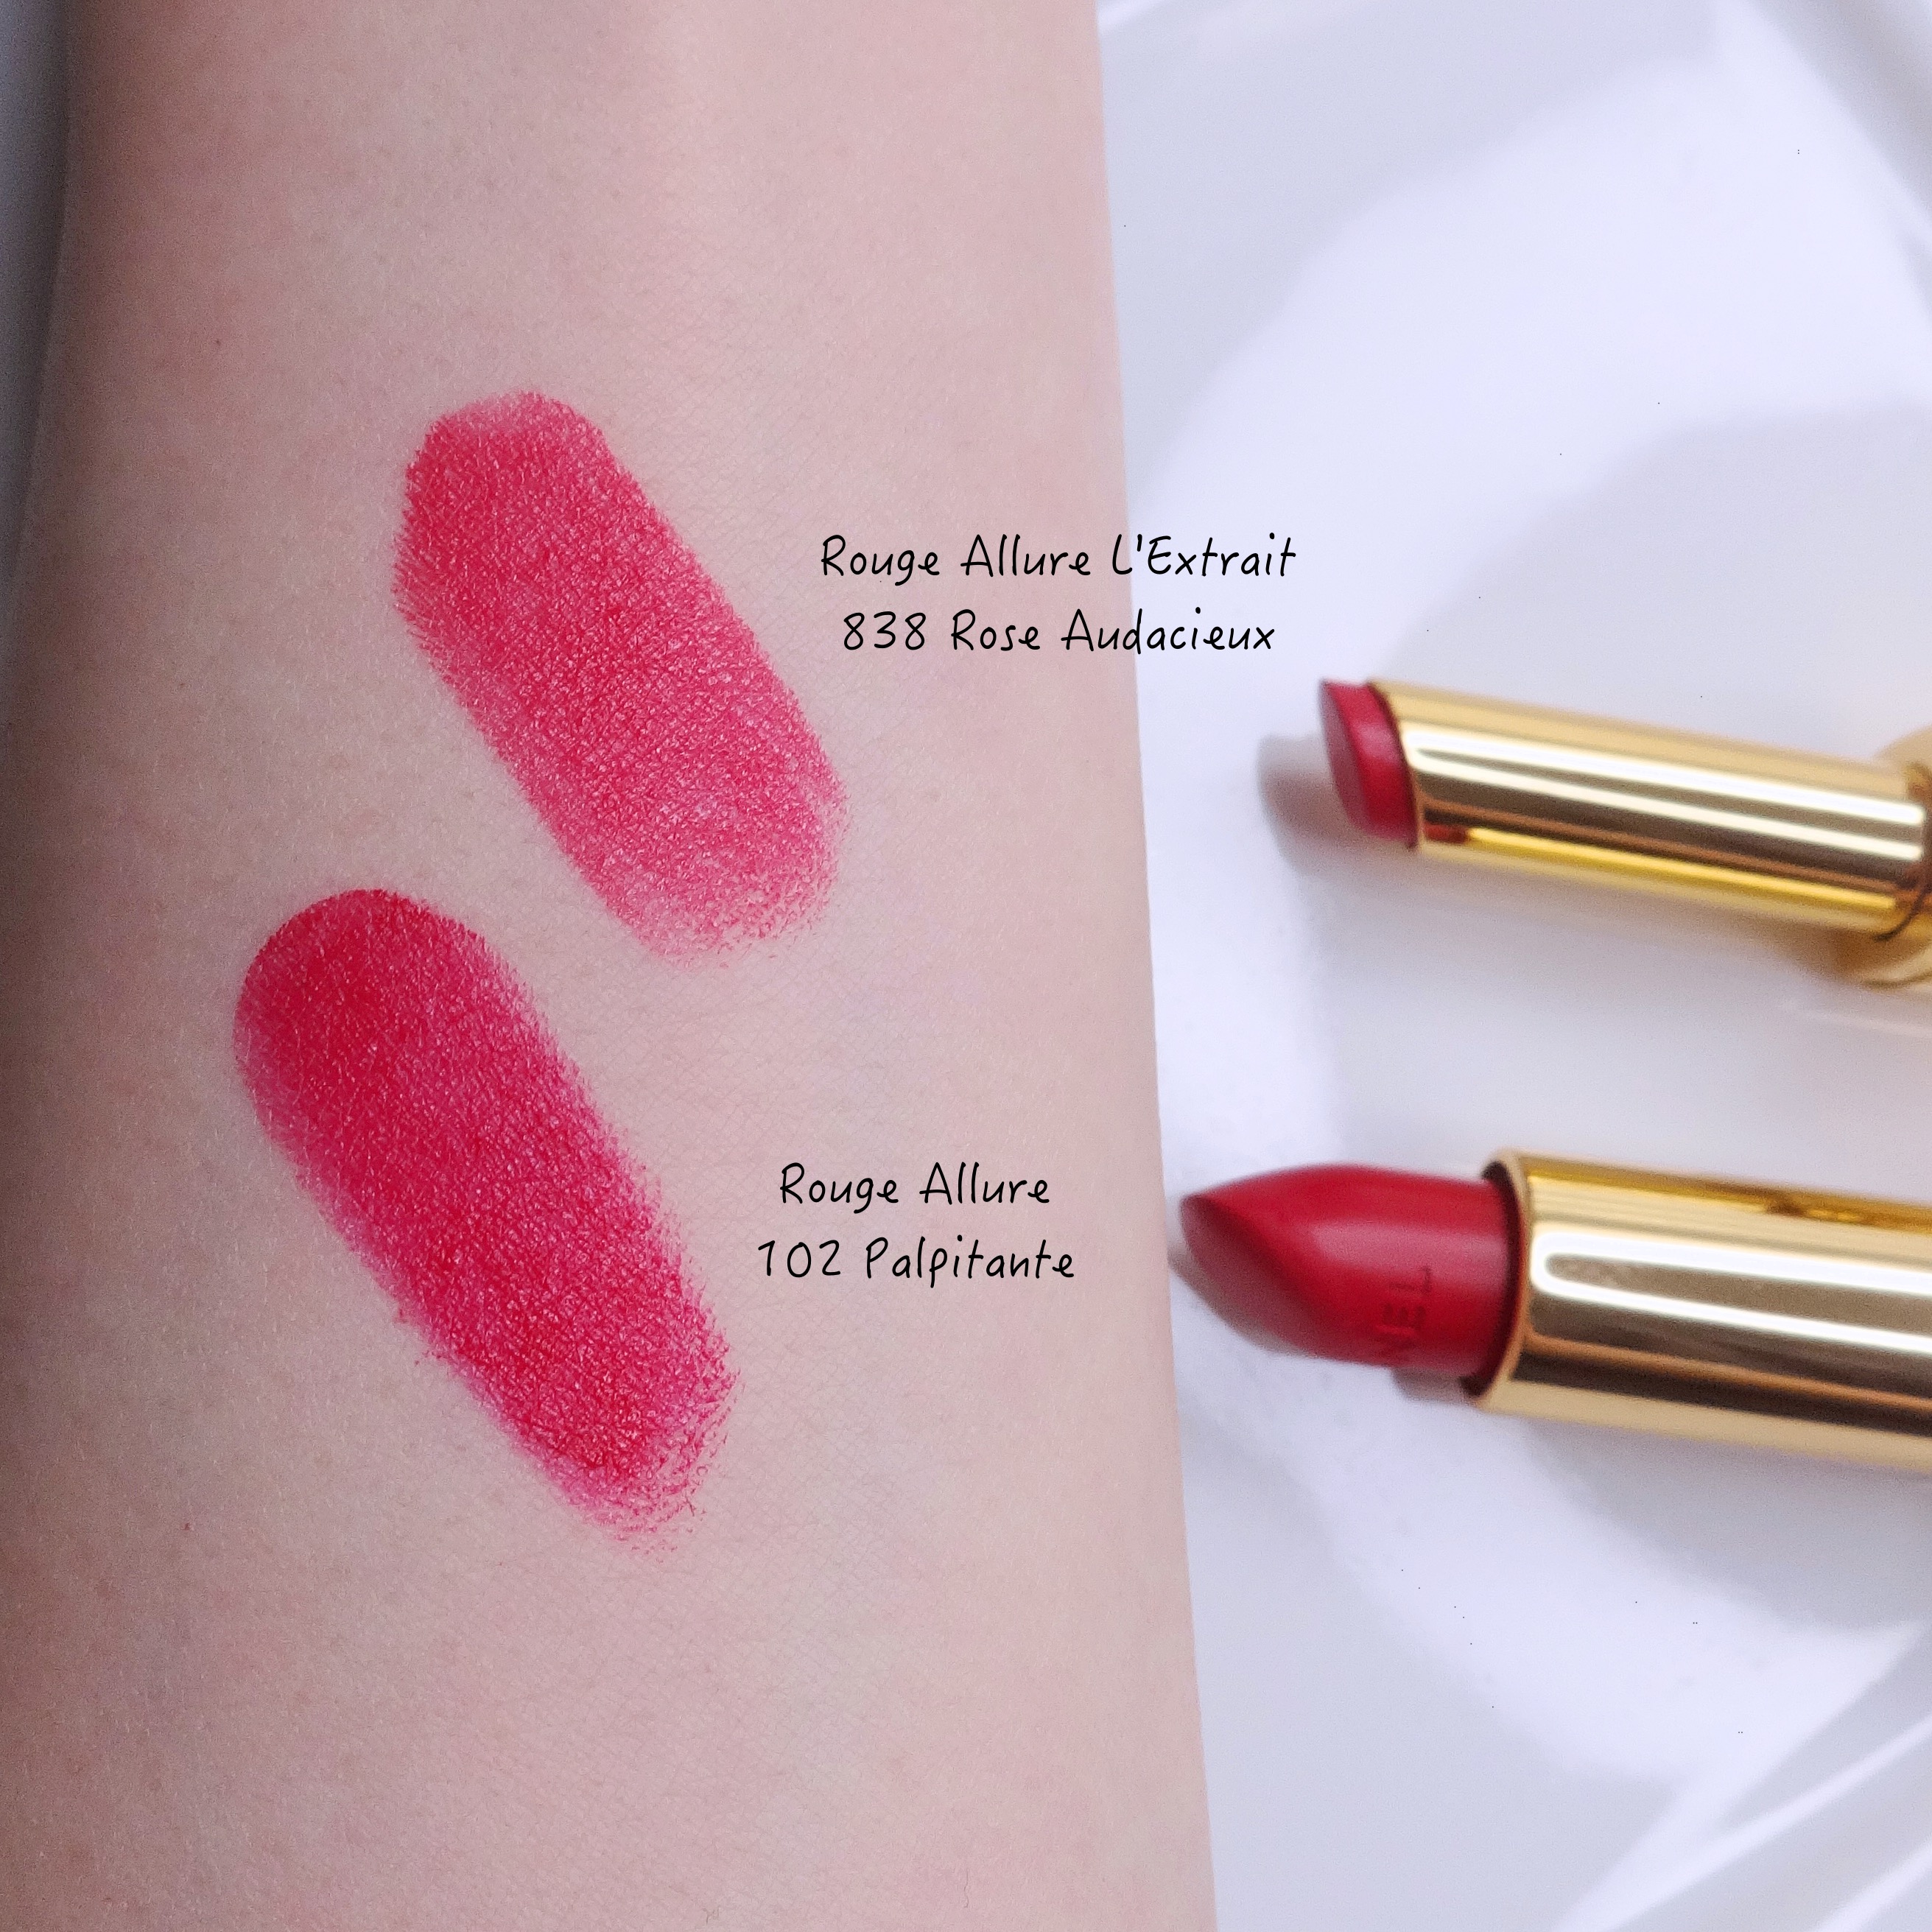 Chanel Rouge Allure L'Extrait review swatches